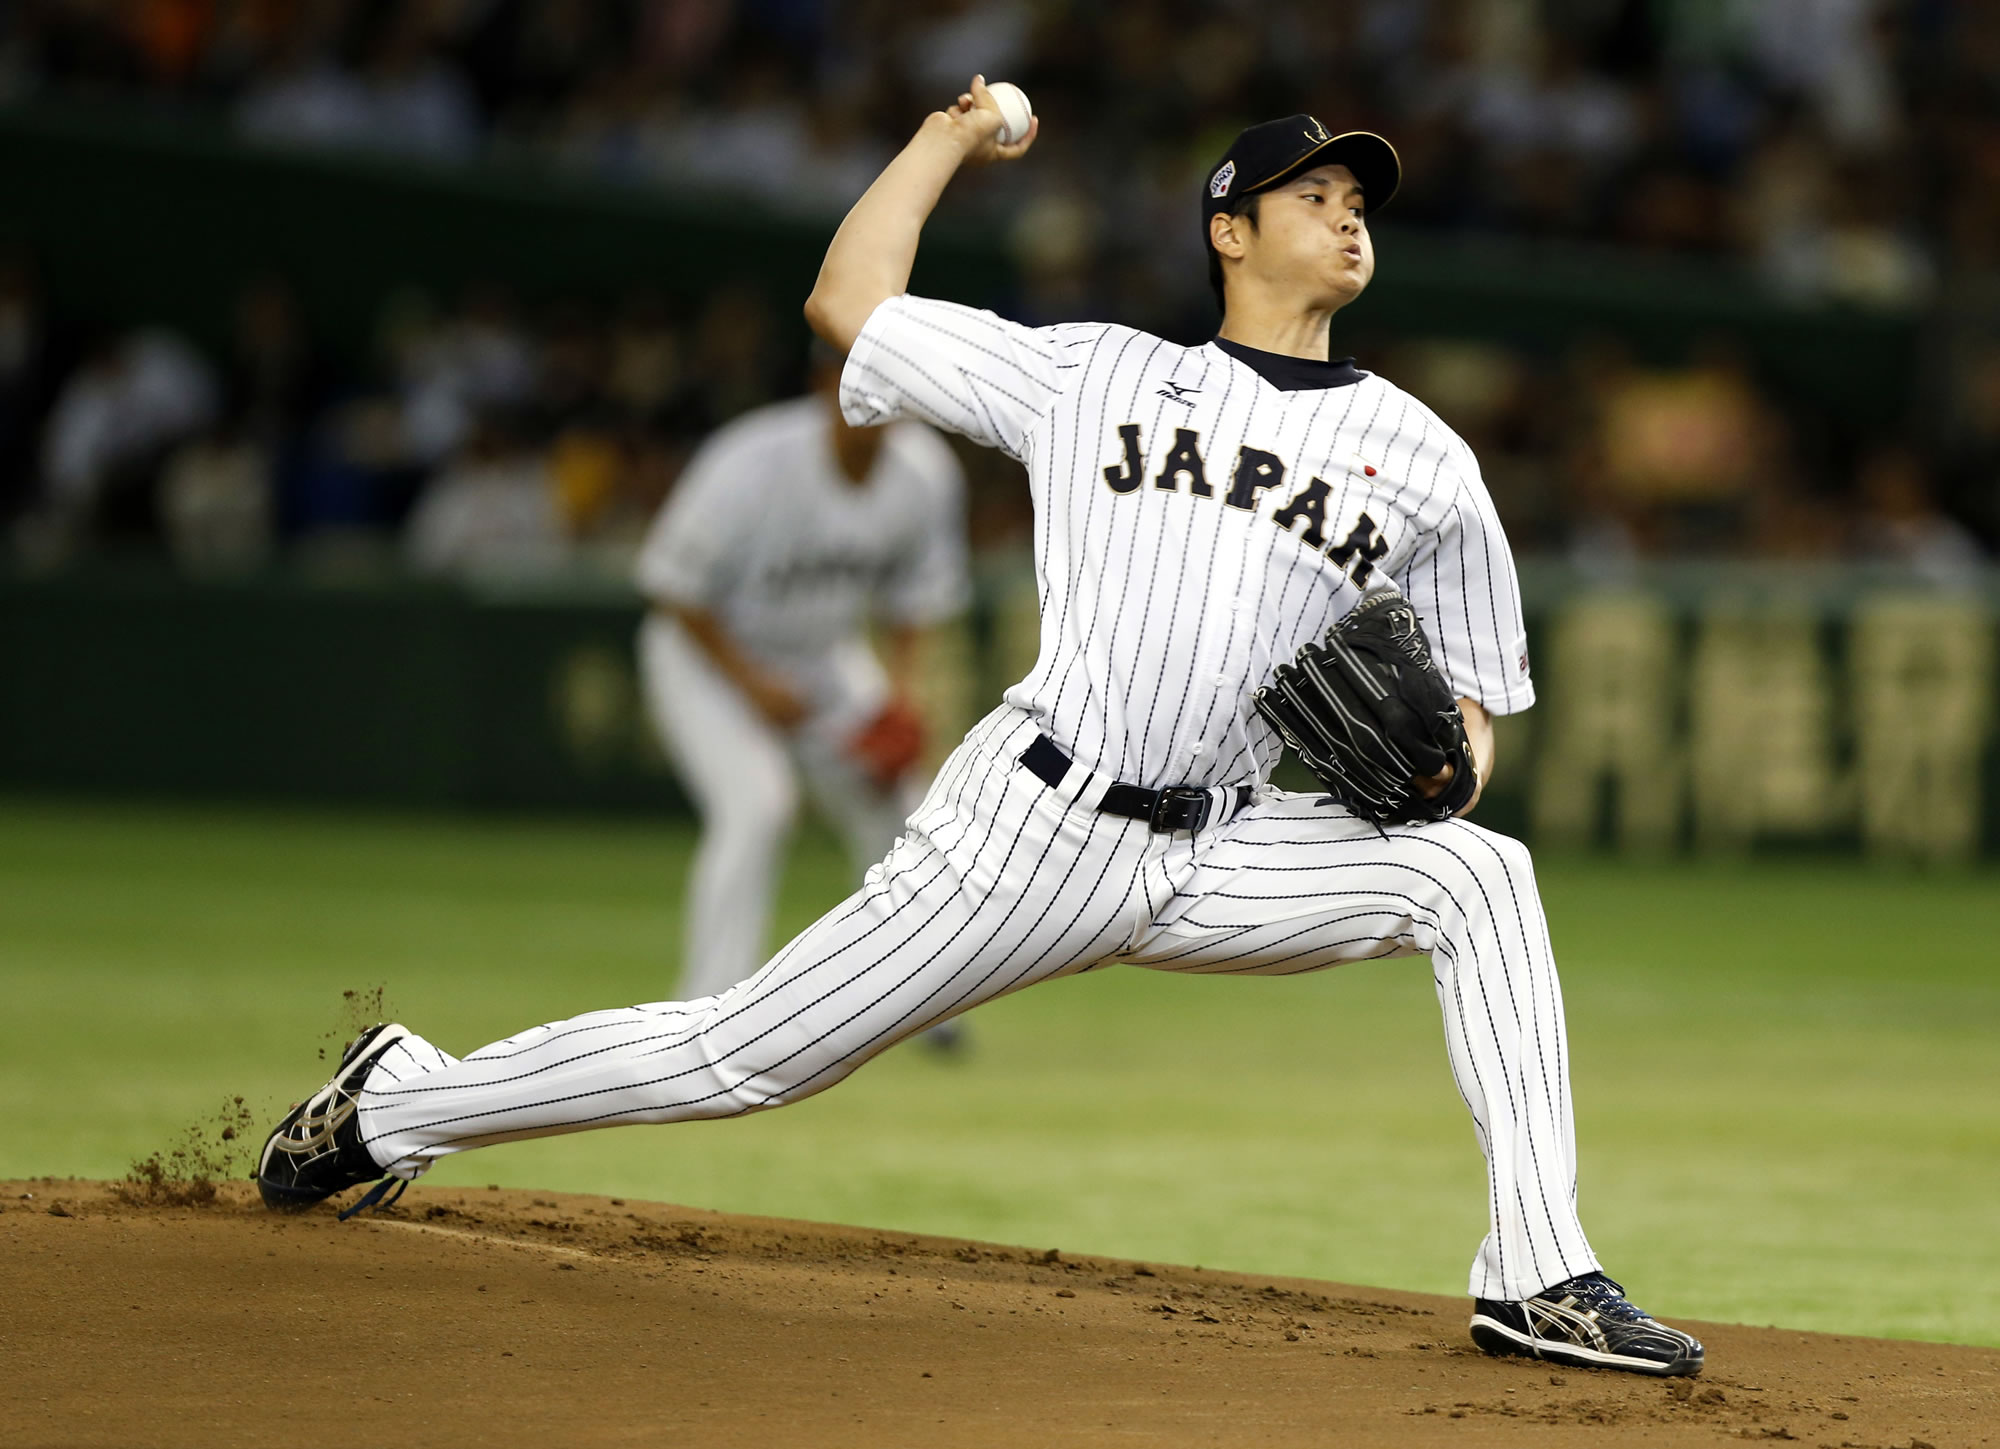 Japanese star Shohei Ohtani is bringing his arm and bat to the Los Angeles Angels. Ohtani's agent put out a statement Friday, Dec. 8, 2017, saying the prized two-way player had decided to sign with the Angels, a surprise winner over Seattle, Texas and several other teams.